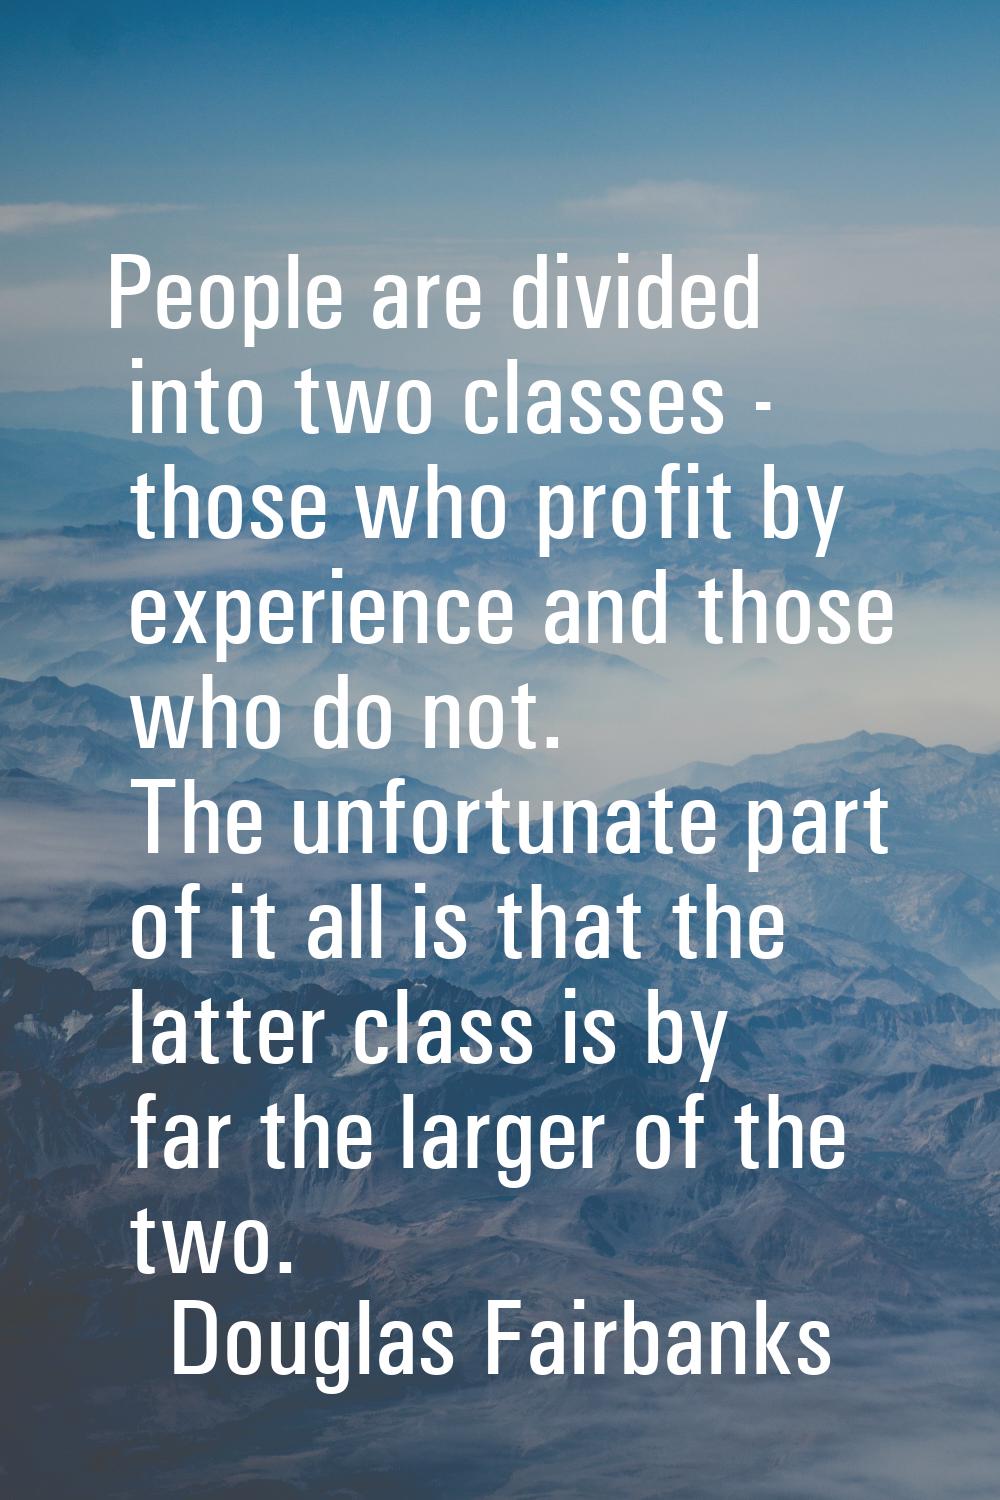 People are divided into two classes - those who profit by experience and those who do not. The unfo